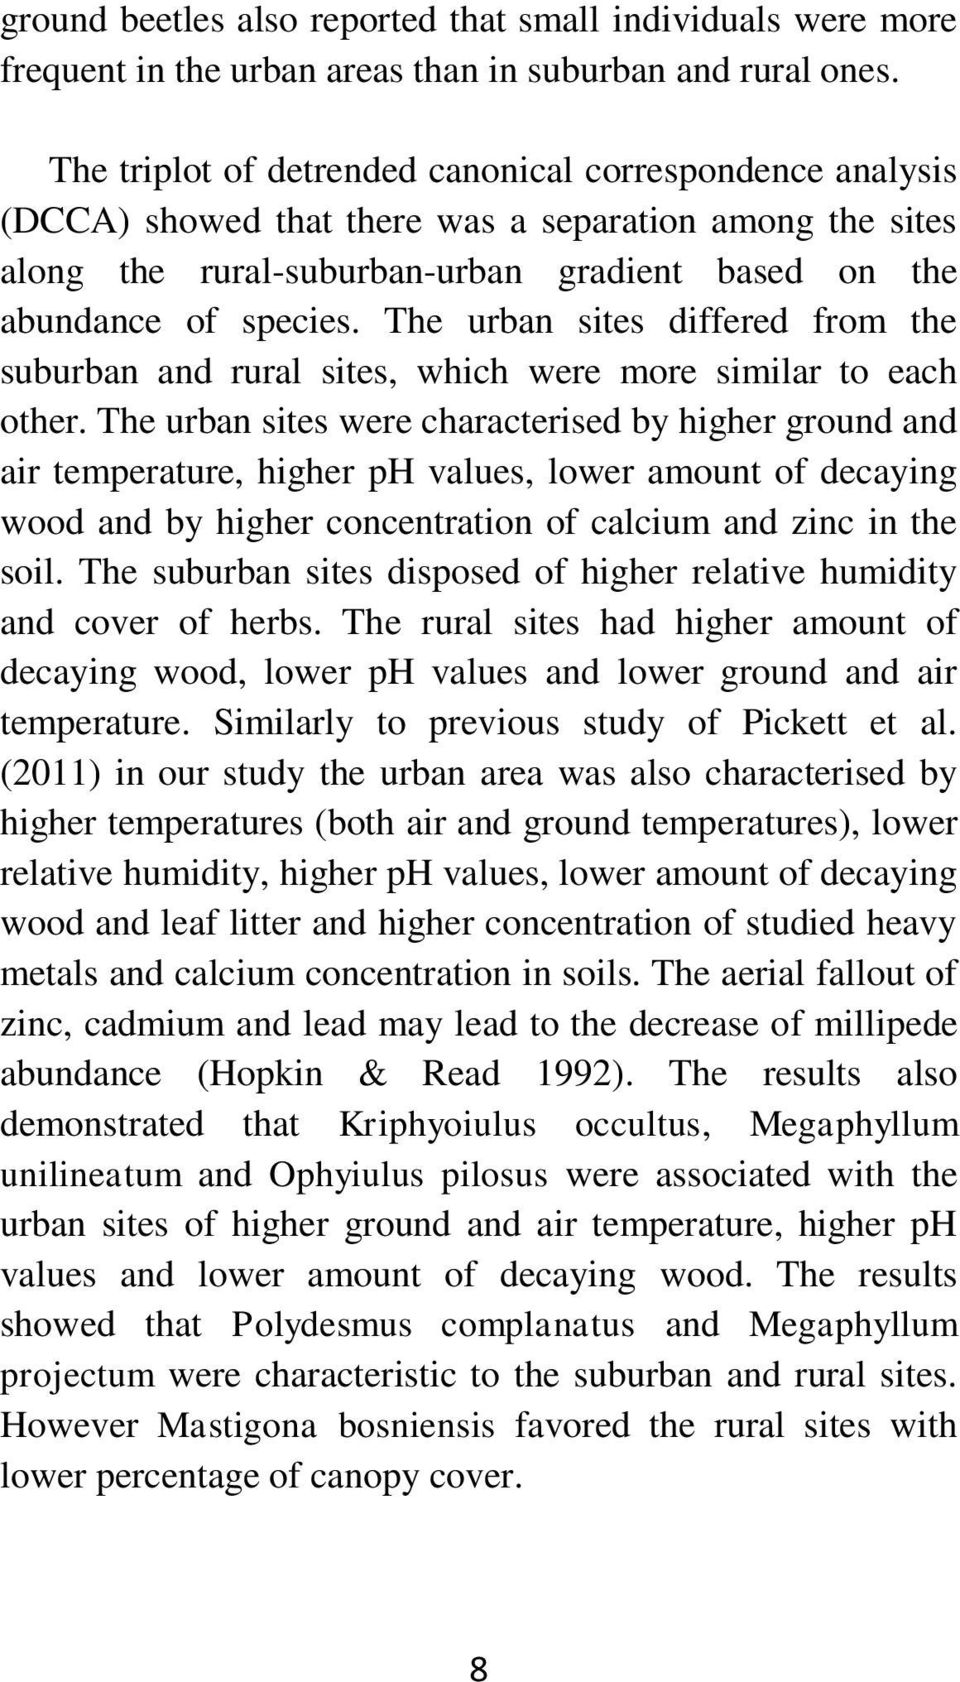 The urban sites differed from the suburban and rural sites, which were more similar to each other.